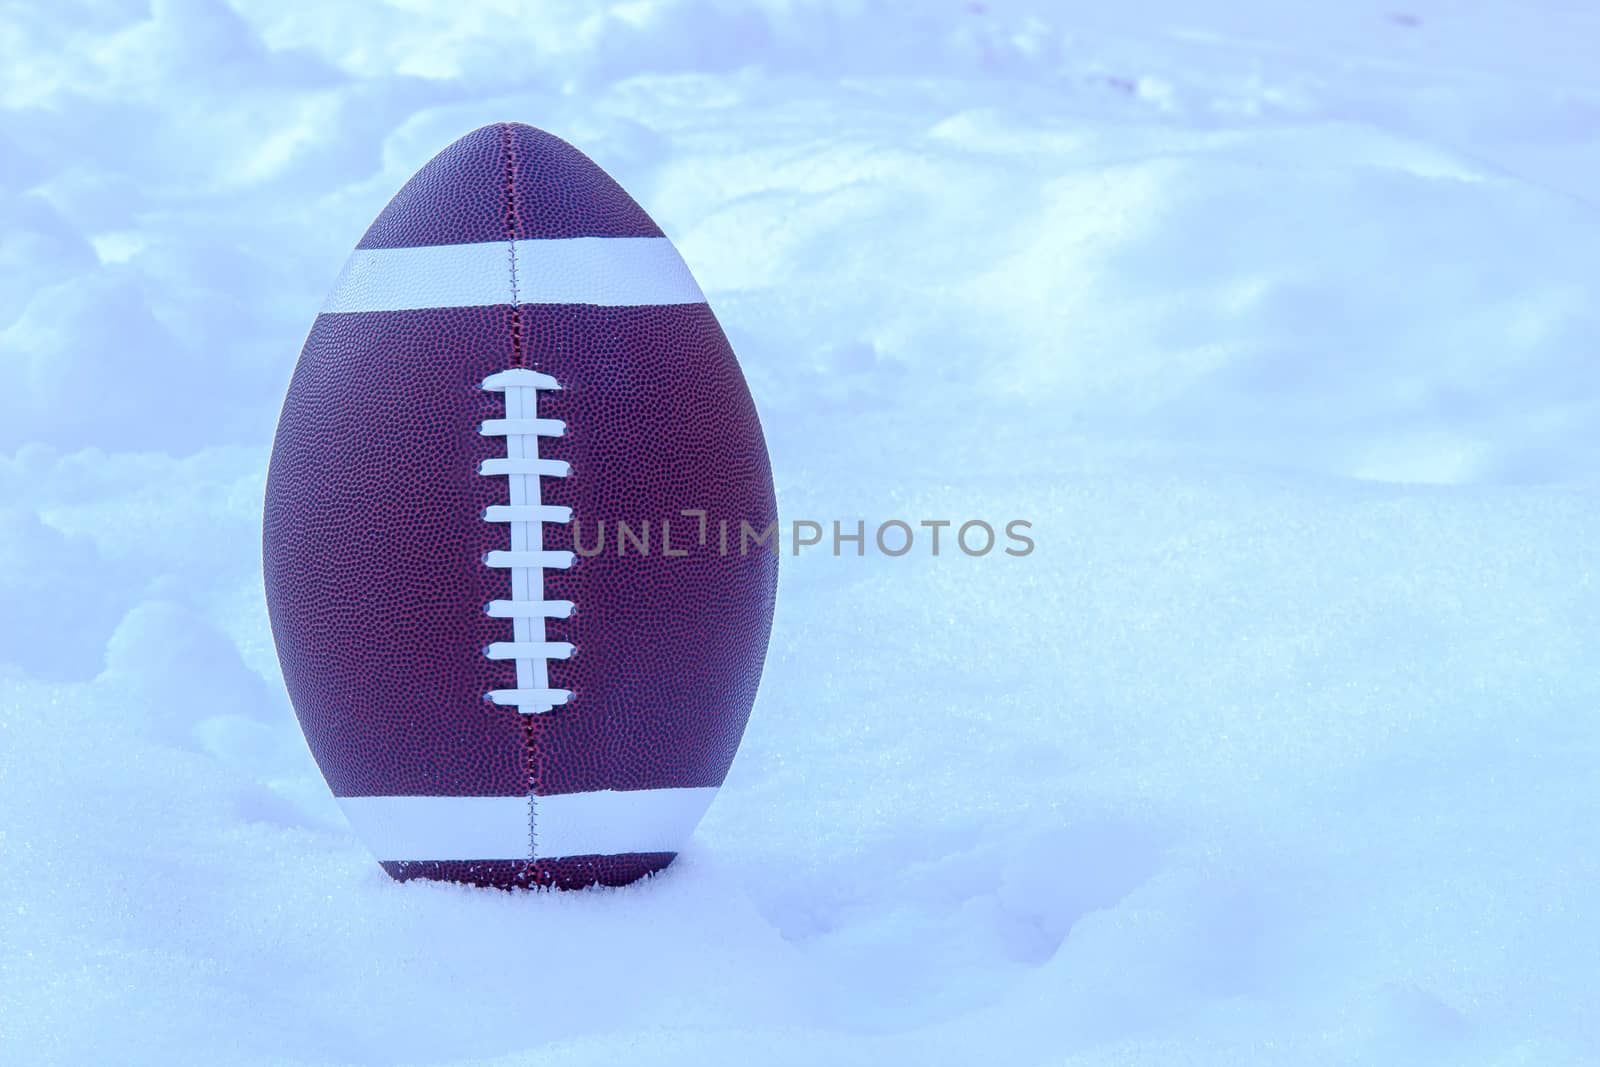 American football on Snow during winter by oasisamuel